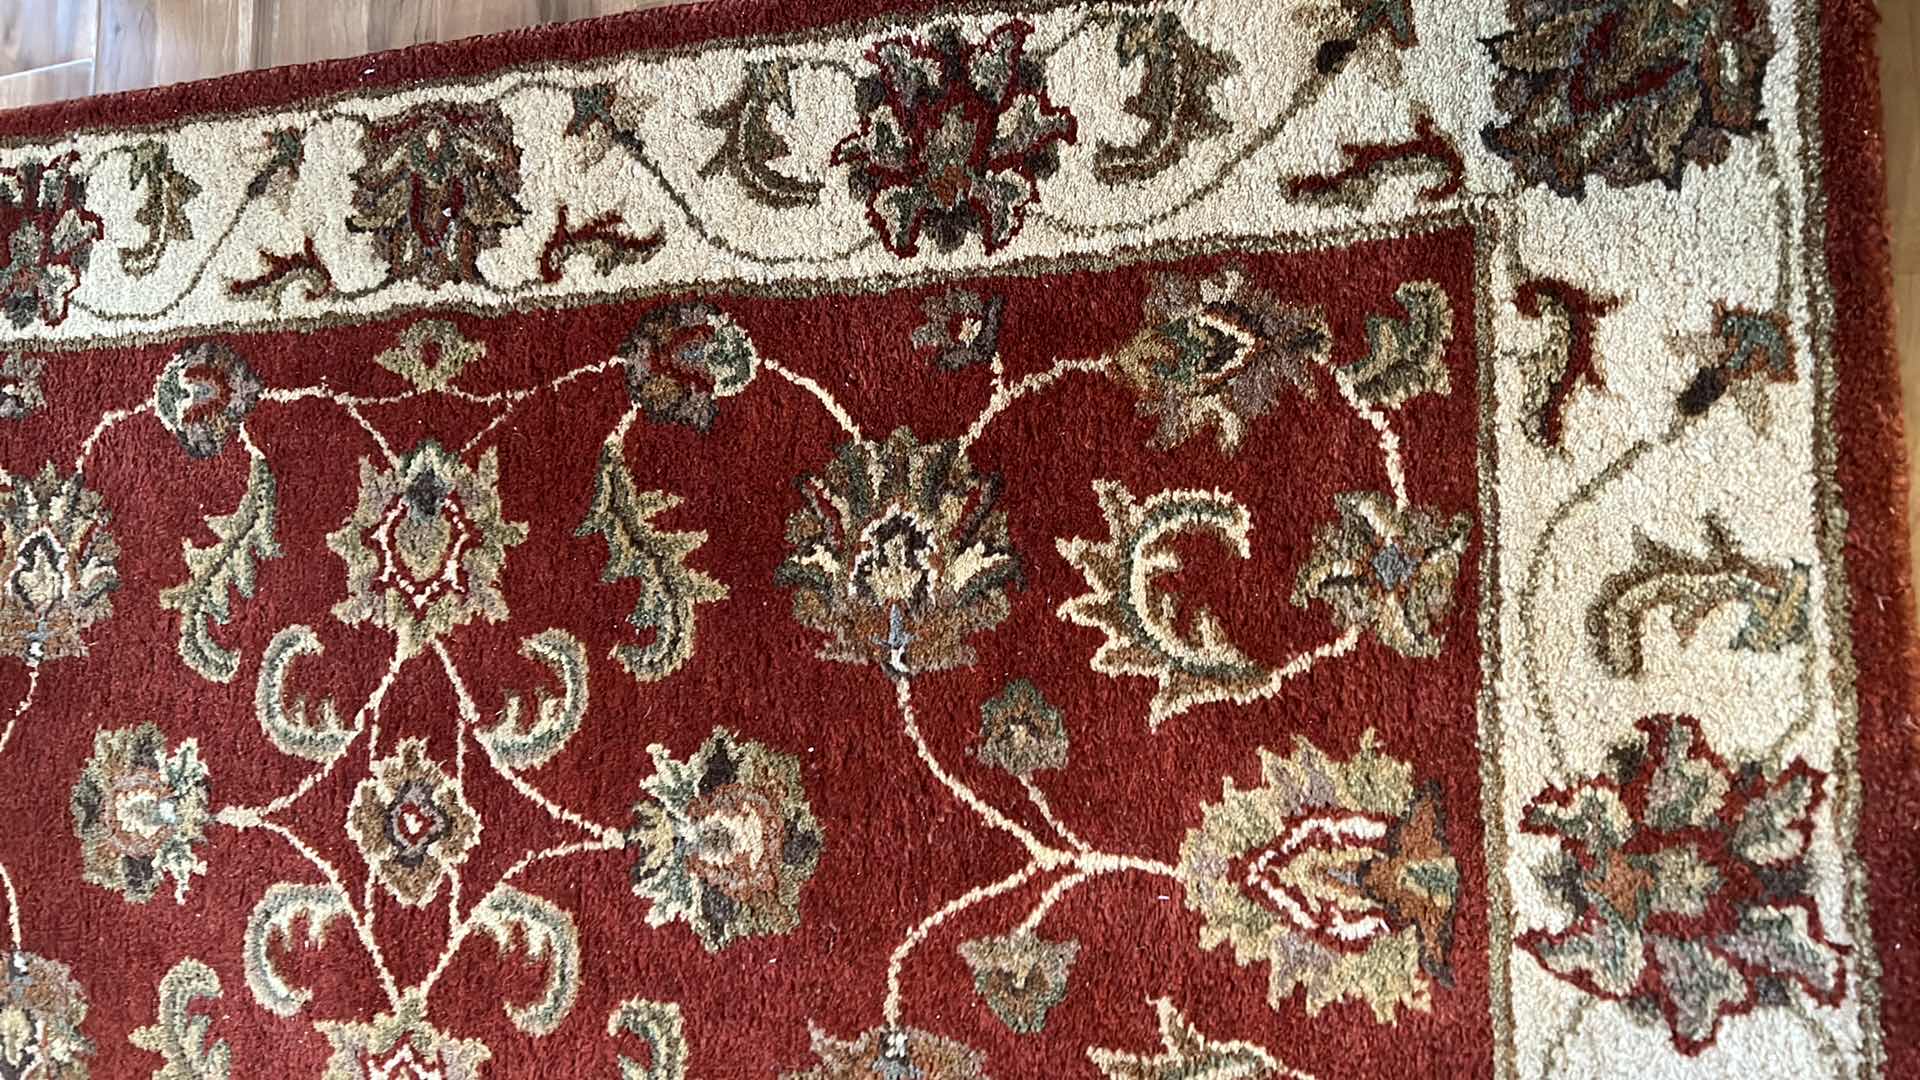 Photo 4 of KENNETH MINK BURGUNDY AND TAN FLORAL WOOL RUG 3’x5’